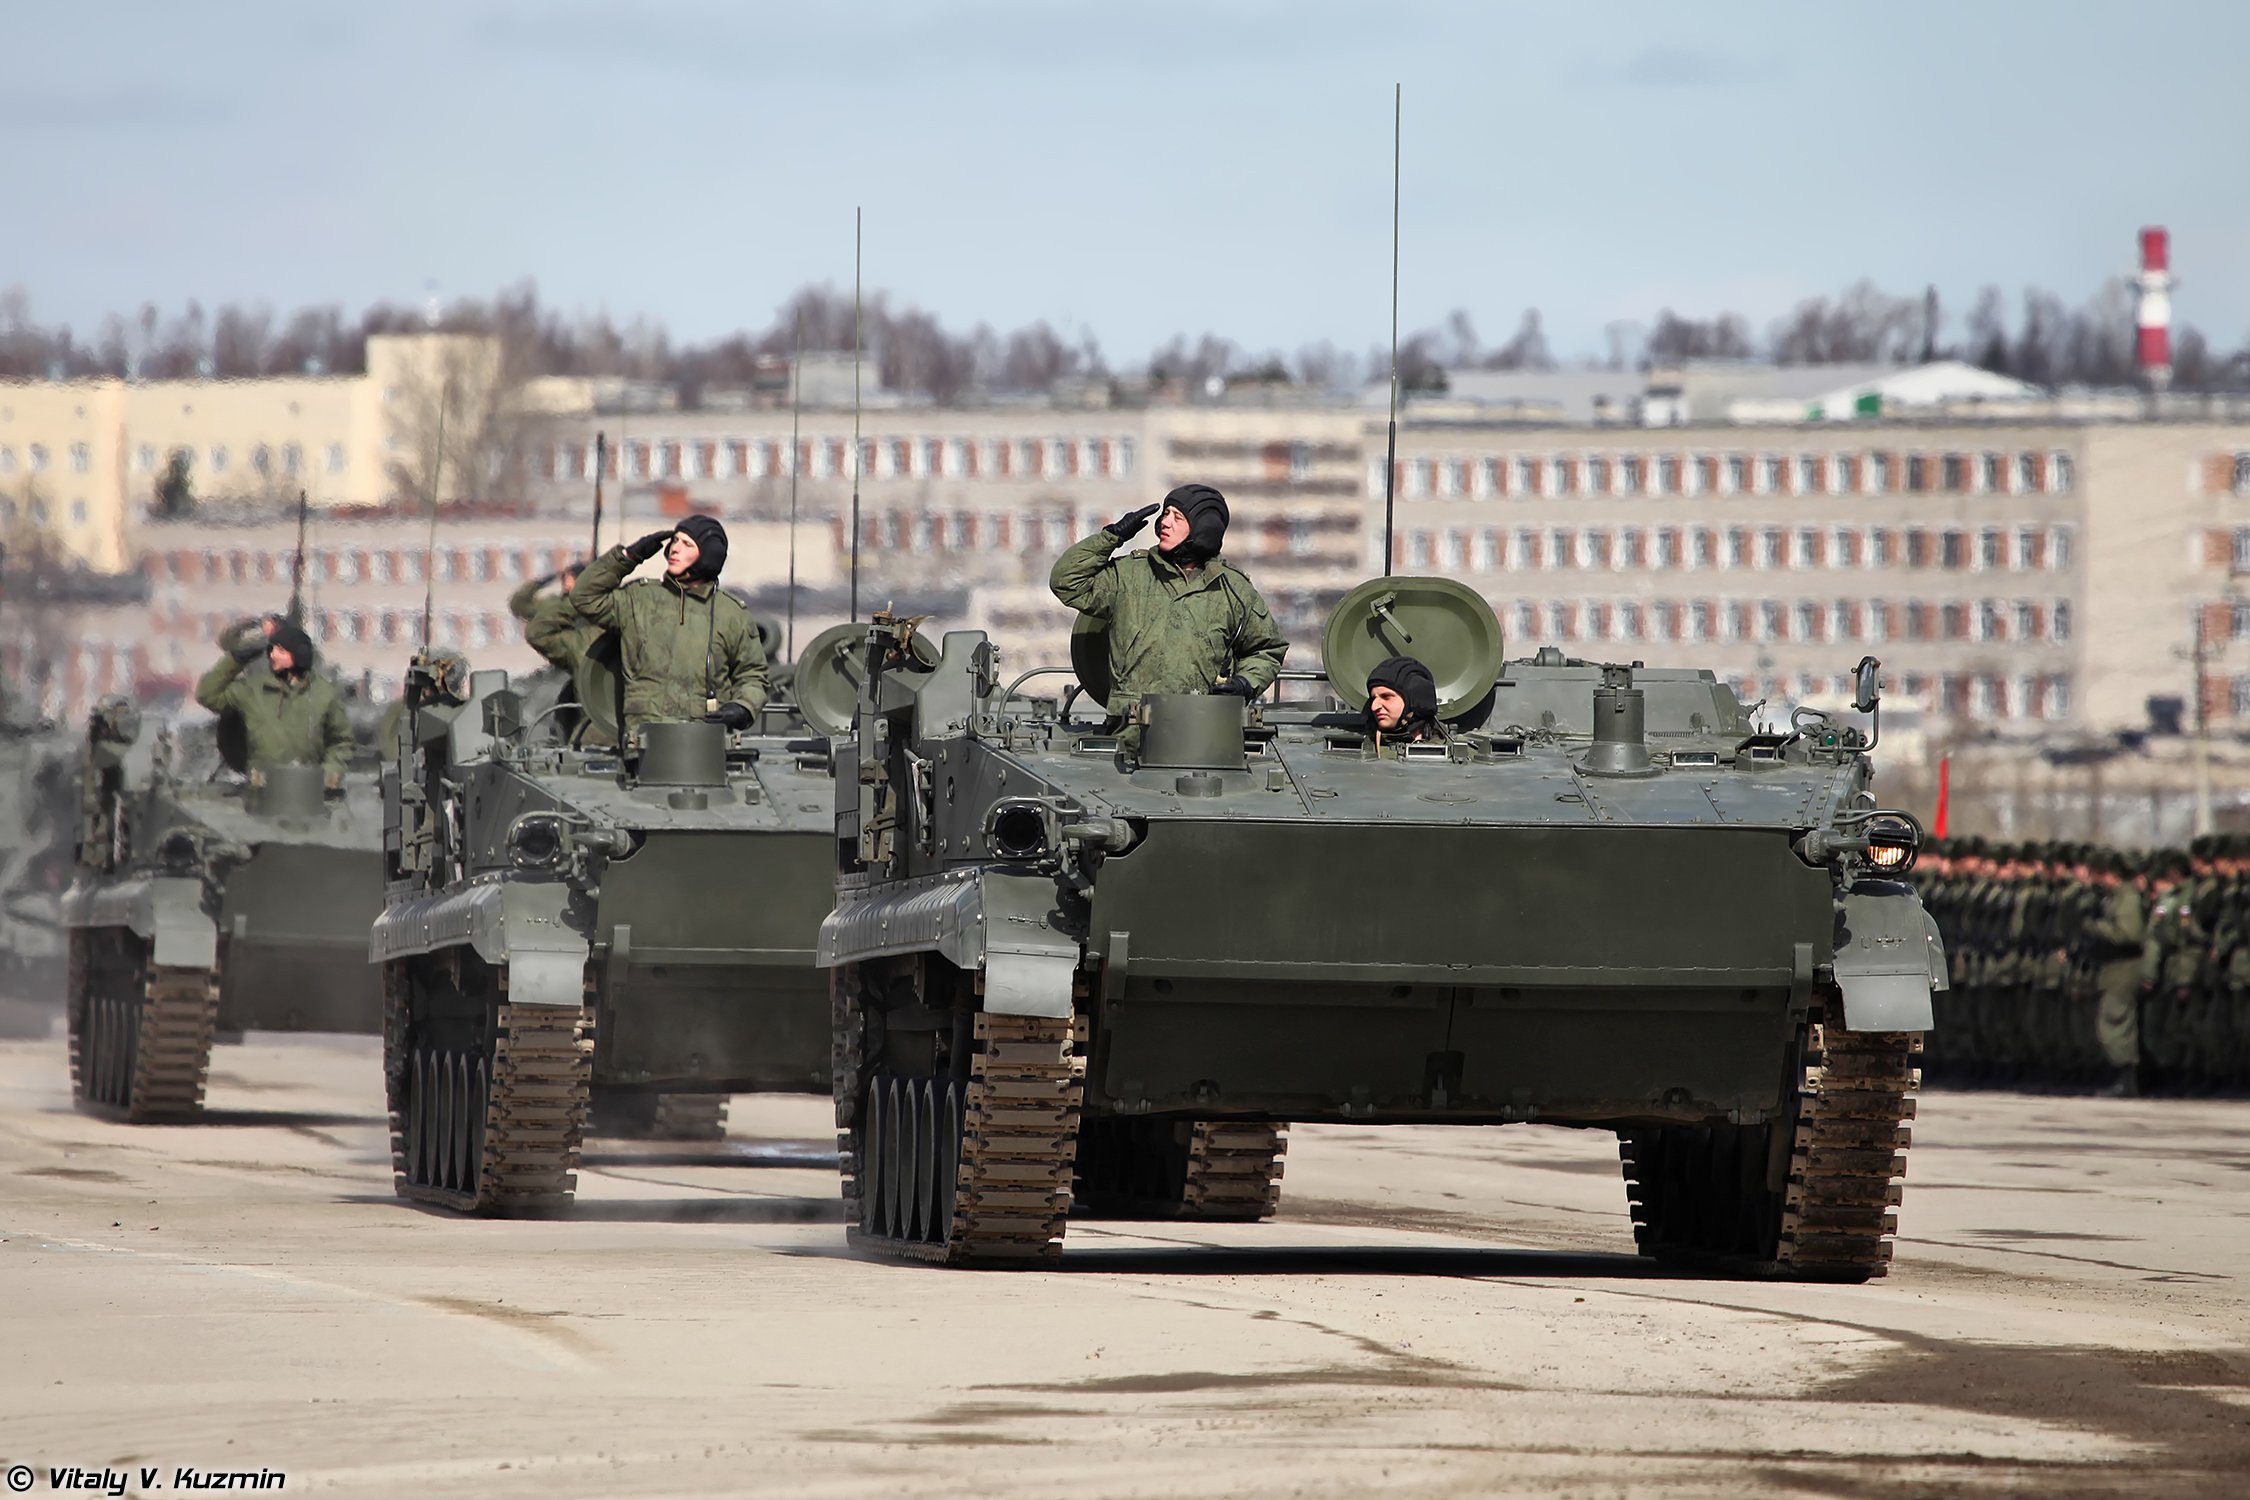 9p157 2, Combat, Vehicle, From, 9k123, Khrizantema s, Anti tank, Missile, System, Armoured, April, 9th, Rehearsal, In, Alabino, Of, 2014, Victory, Day, Parade, Russia, Military, Army, Russian Wallpaper